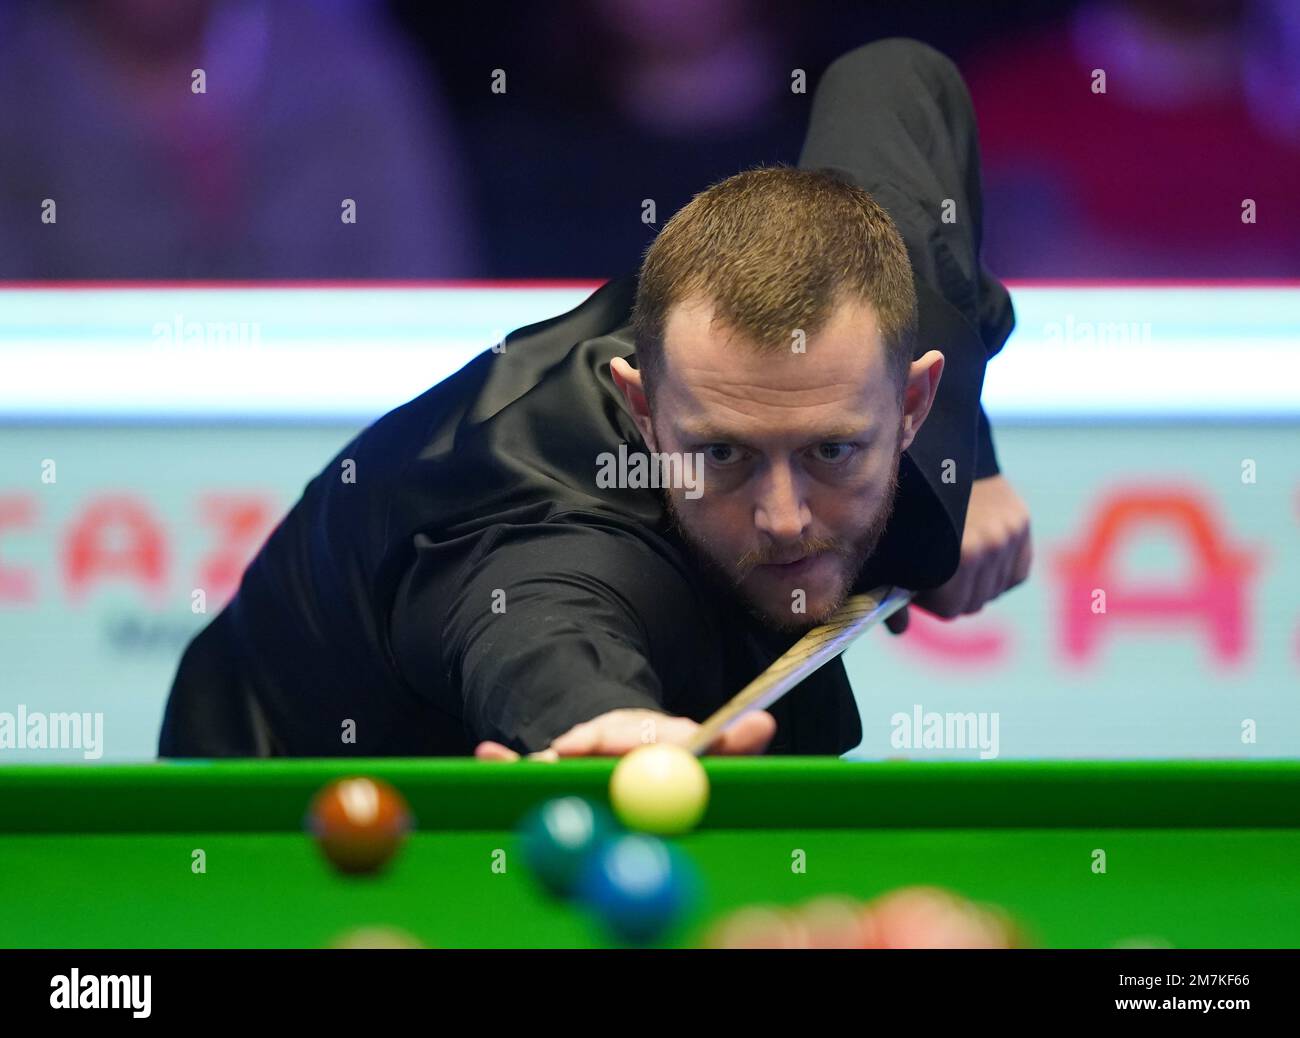 Mark Allen in action against Barry Hawkins during day three of the Cazoo Masters at Alexandra Palace, London